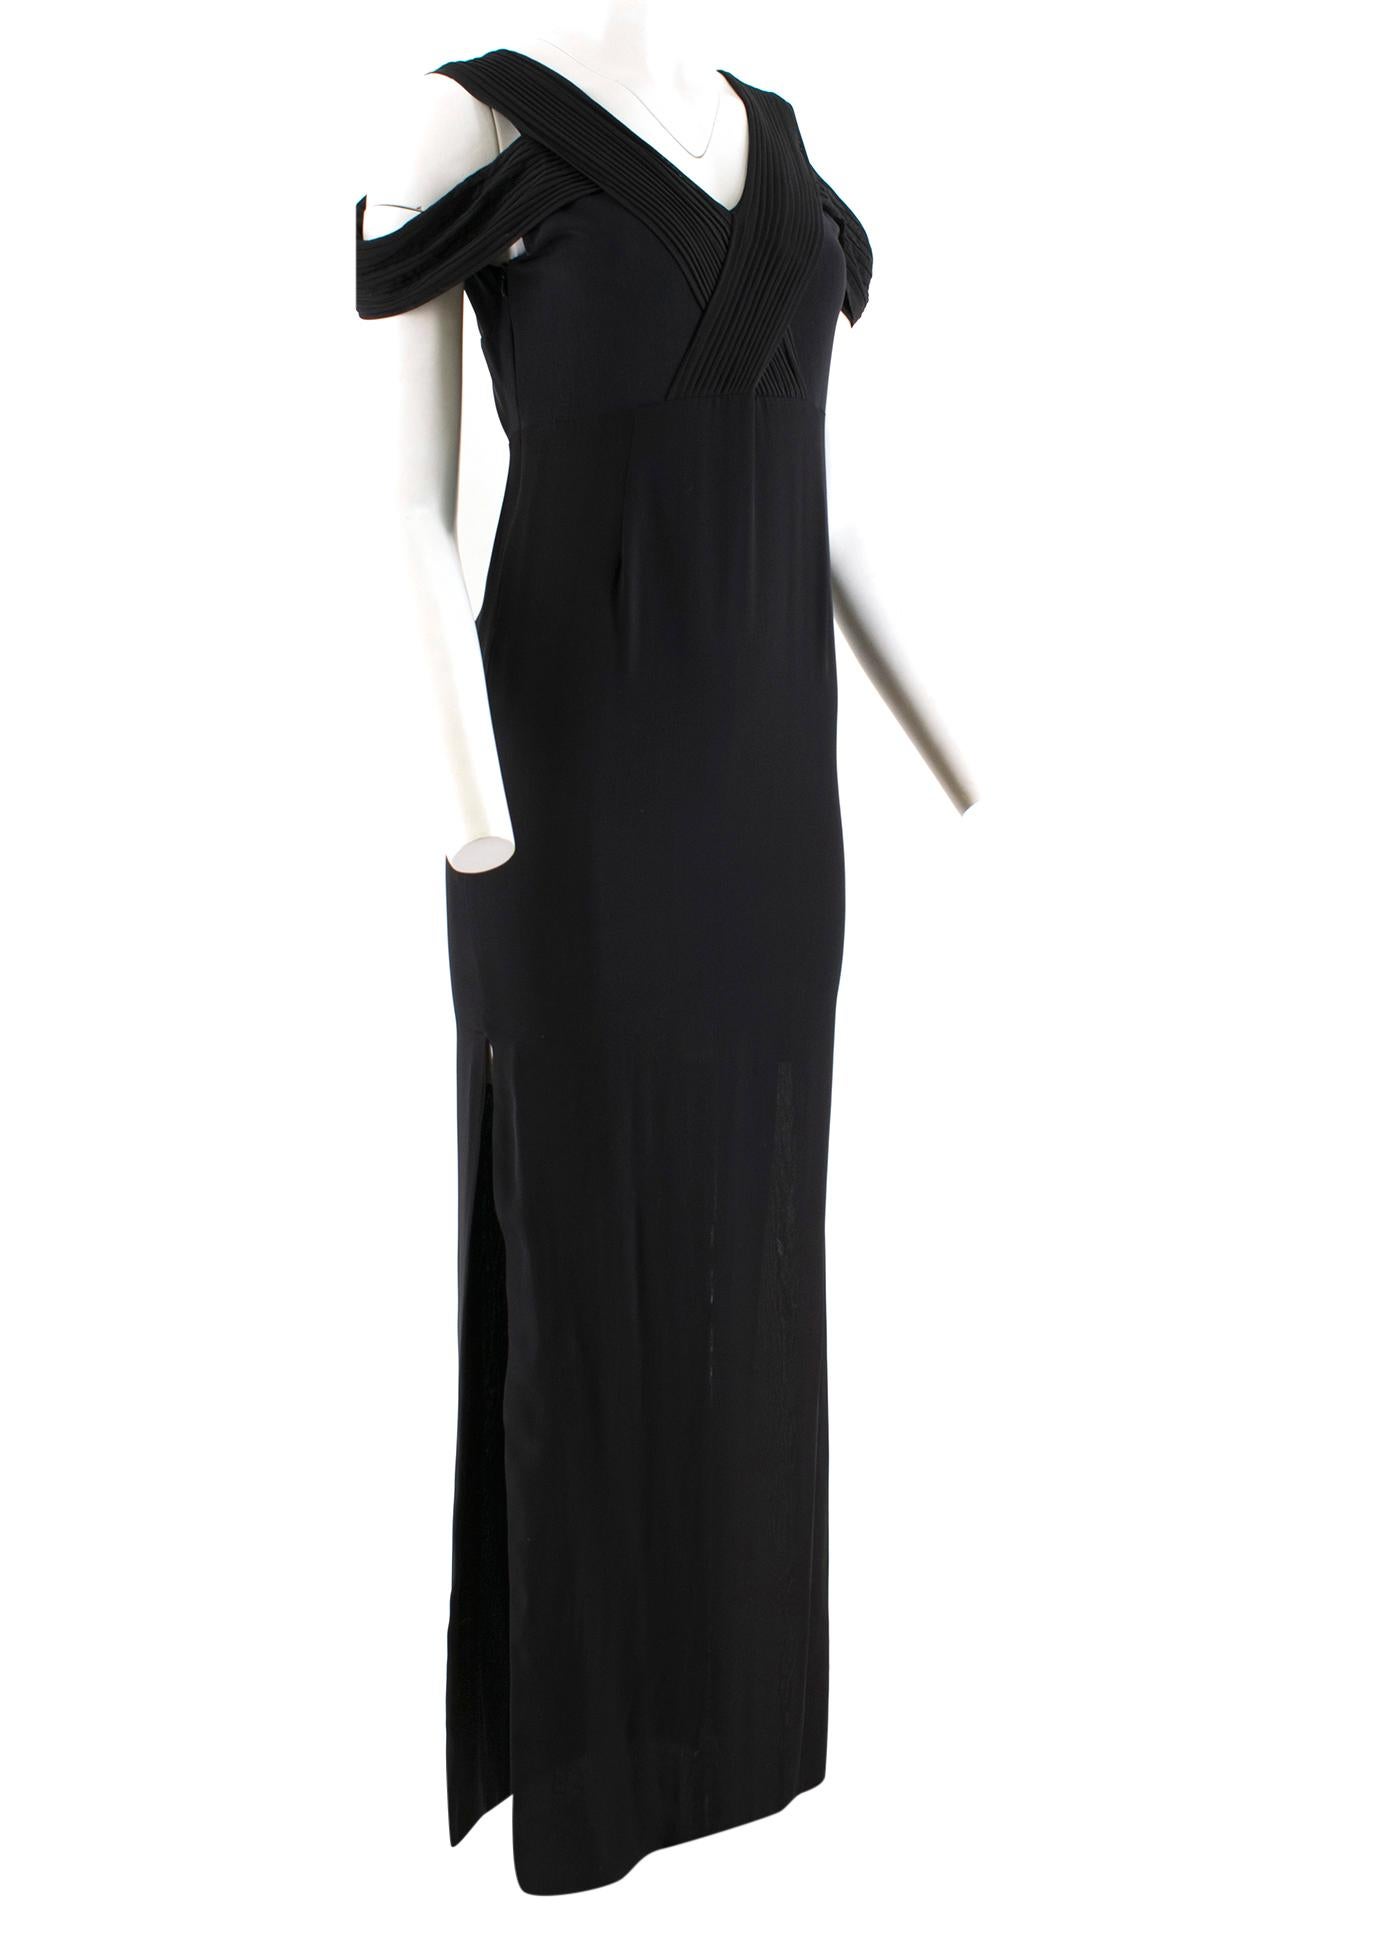 Yasmin Kianfar Black Pleated Panel Cold-Shoulder Dress 

- Black Maxi Gown 
- V-neck, cold shoulder 
- Pleated strap and chest details 
- Silk with mesh upper 
- Zip fastening closure down side
- Fully lined 

Please note, these items are pre-owned